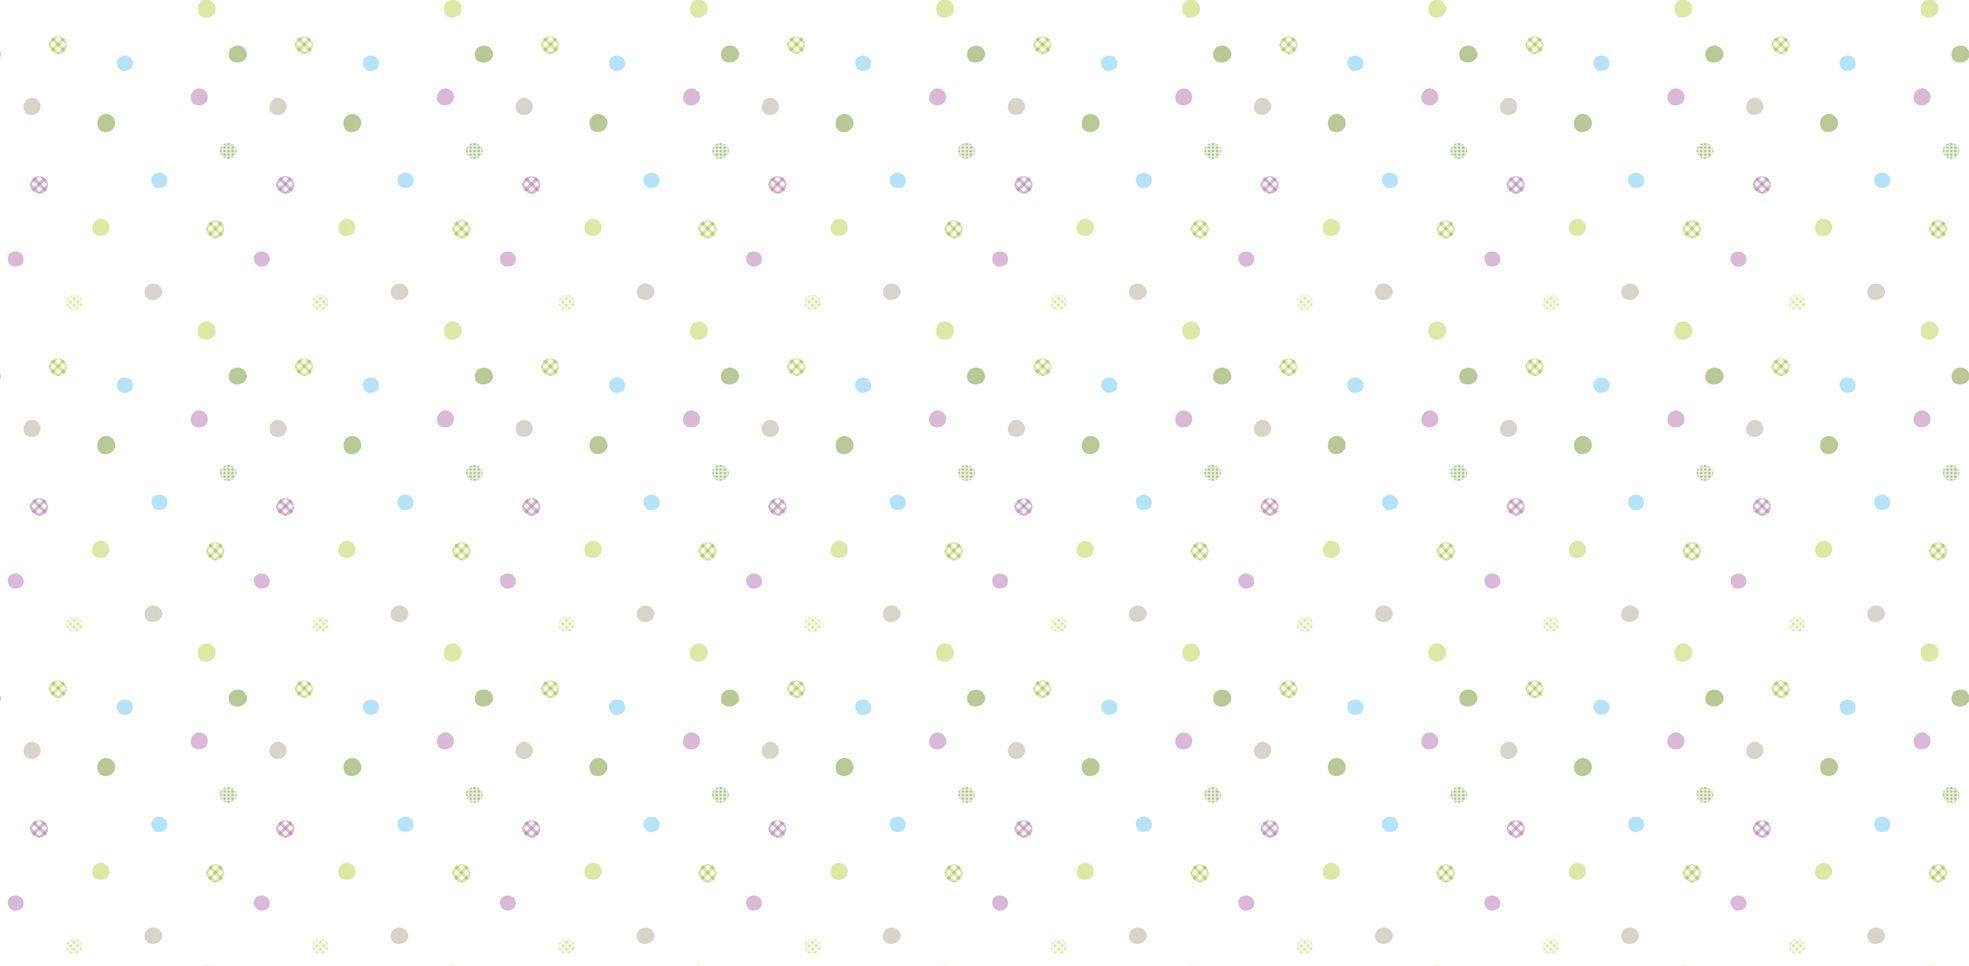 Ice Cream Cellphone Wallpaper With Stars And Love Sprinkles Background  Wallpaper Image For Free Download - Pngtree